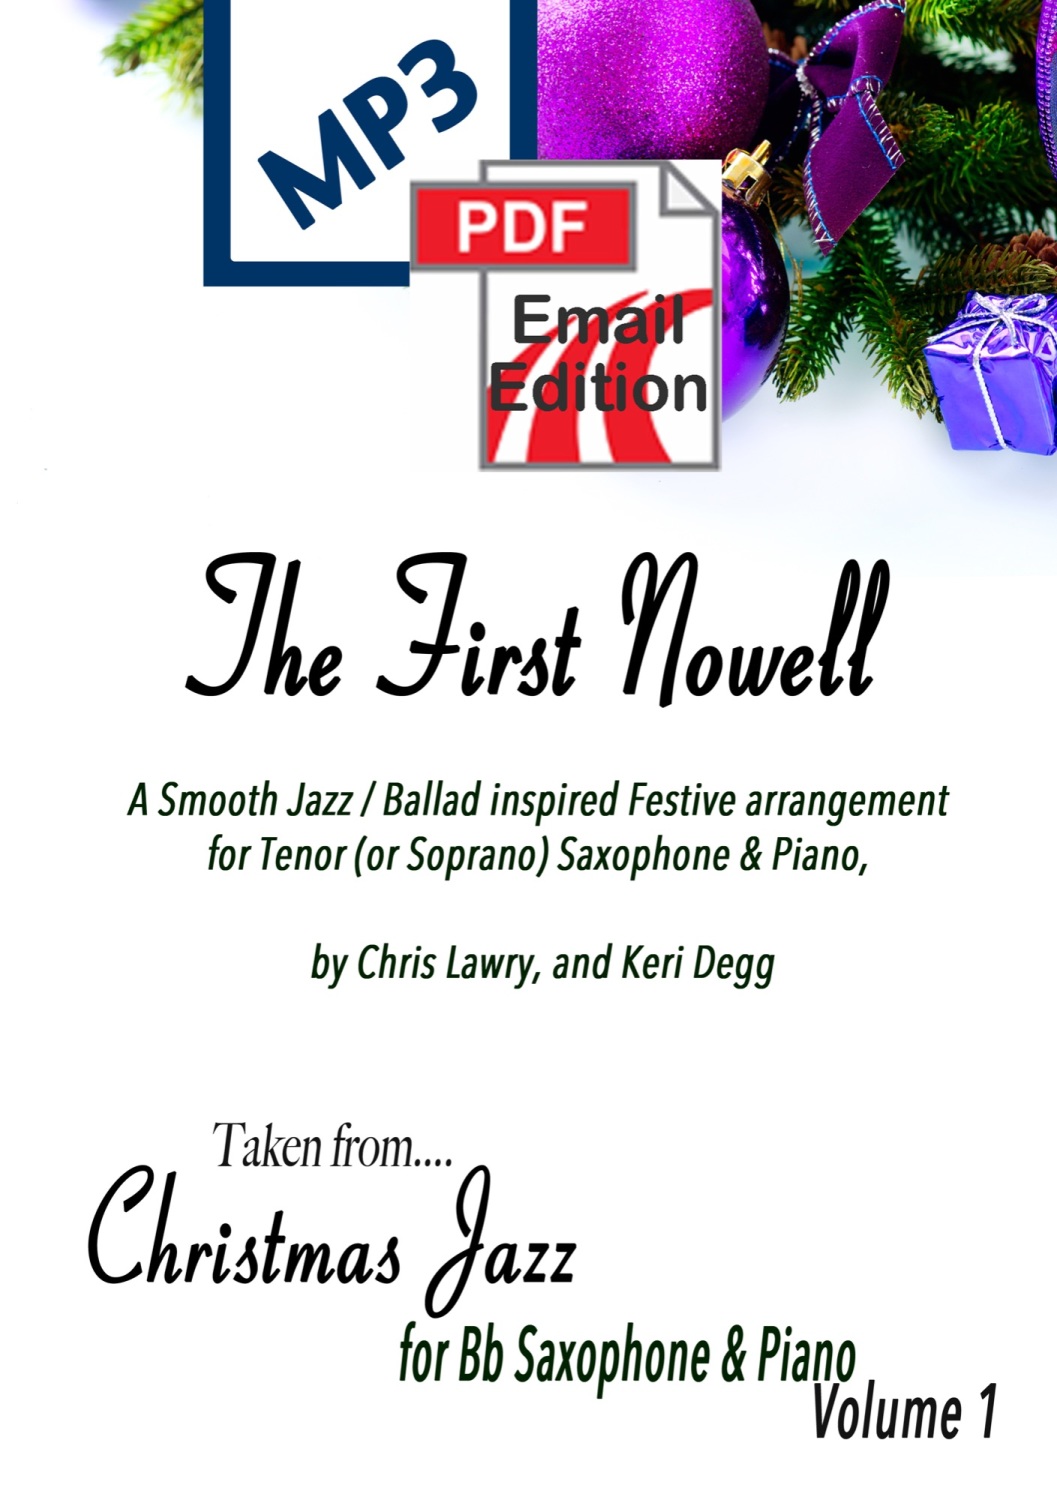 The First Nowell (Noel); A Christmas Jazz inspired smoochy ballad for Tenor